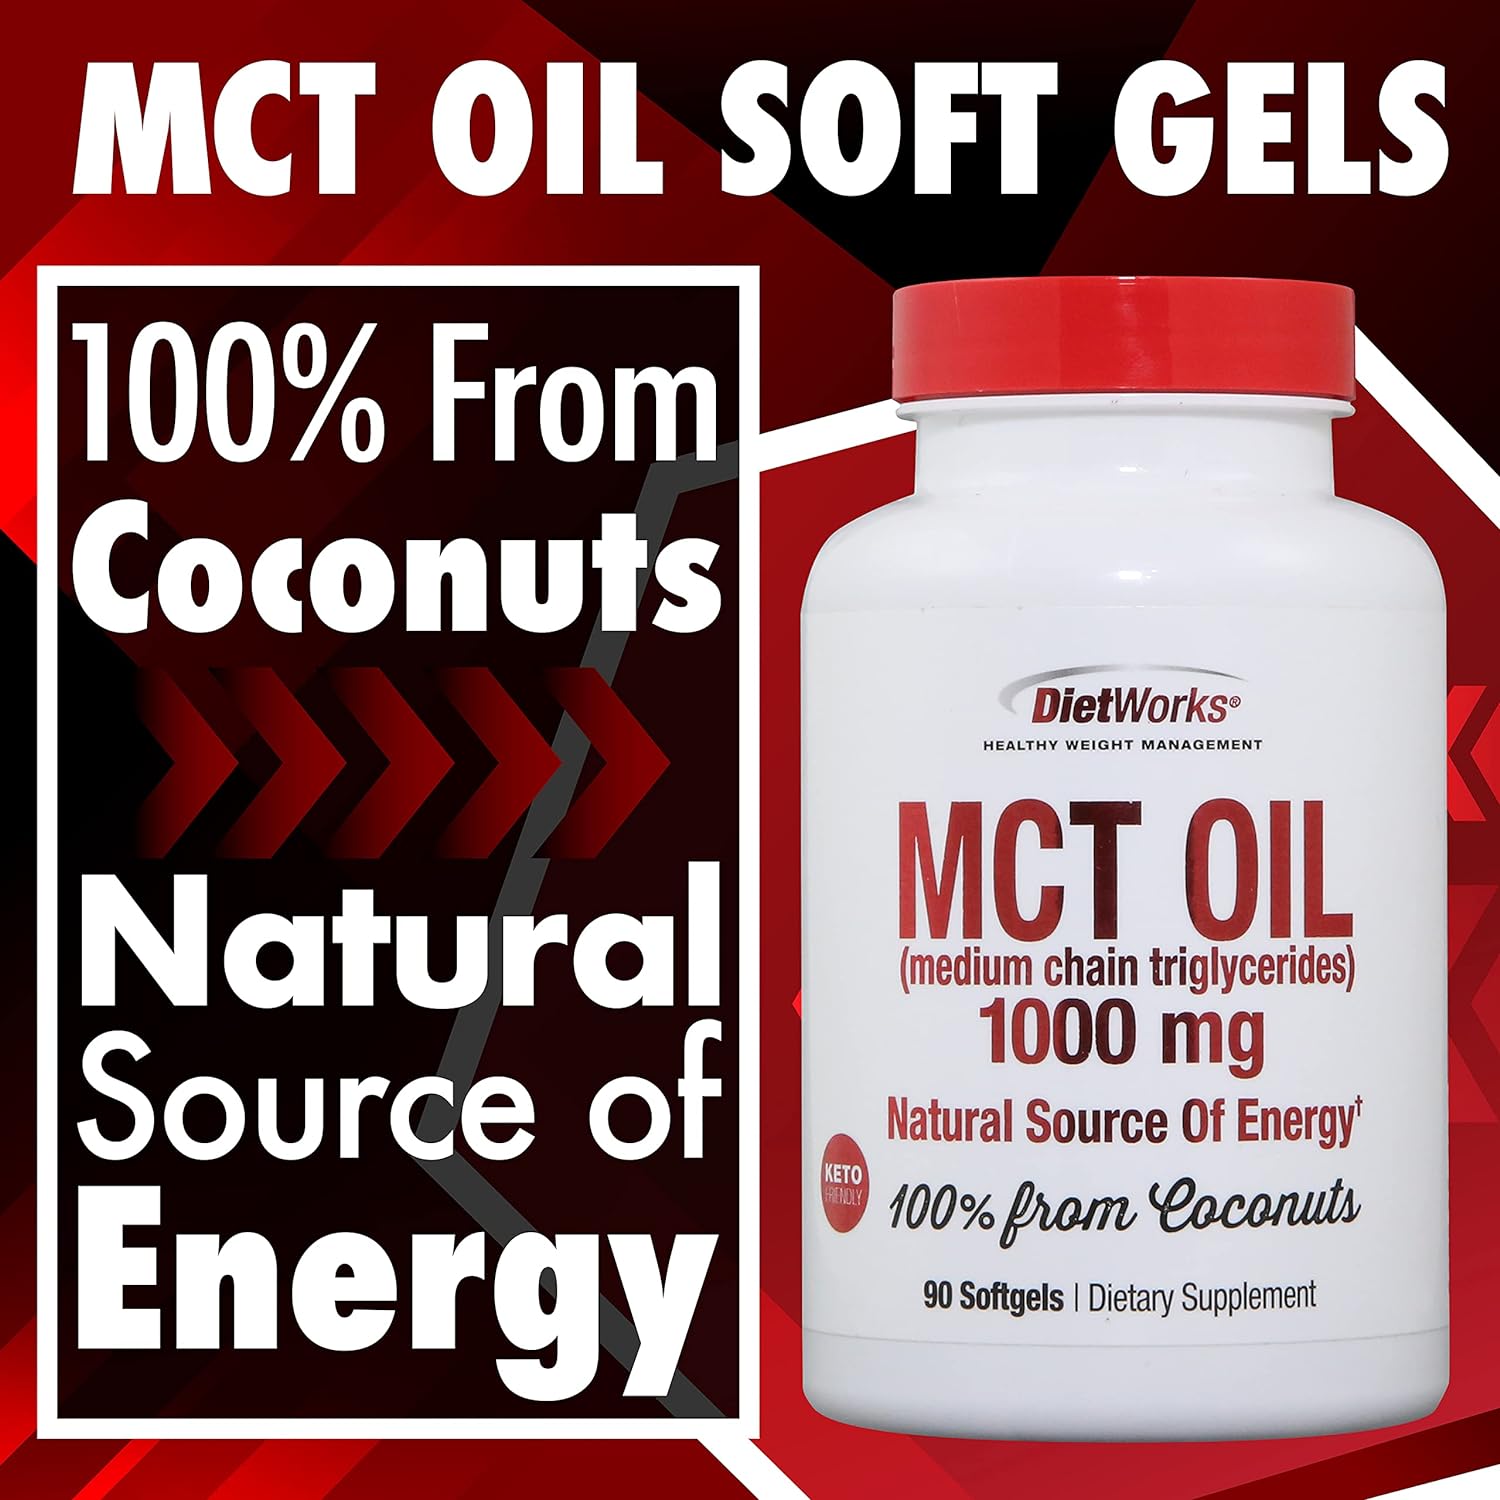 DietWorks Mct Oil Softgels, Supports Fat Burning, Boost Metabolism, Natural Source of Energy, Promotes Weight Loss, Keto and Paleo Friendly, 90 Count : Health & Household